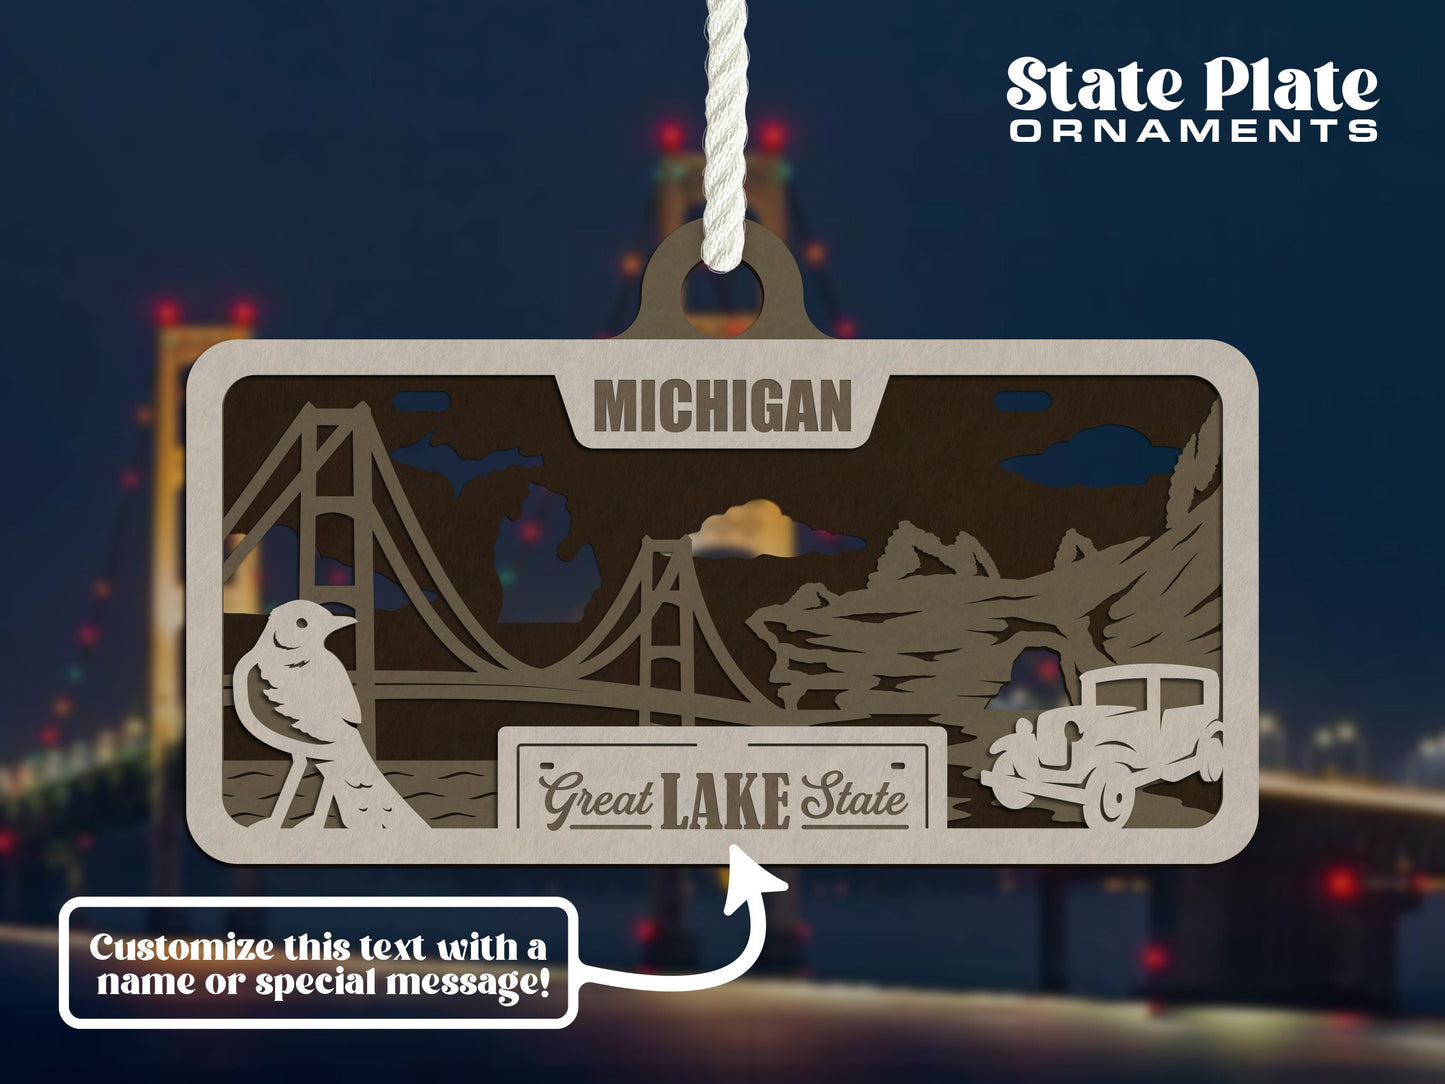 Michigan State Plate Ornament and Signage - SVG File Download - Sized for Glowforge - Laser Ready Digital Files